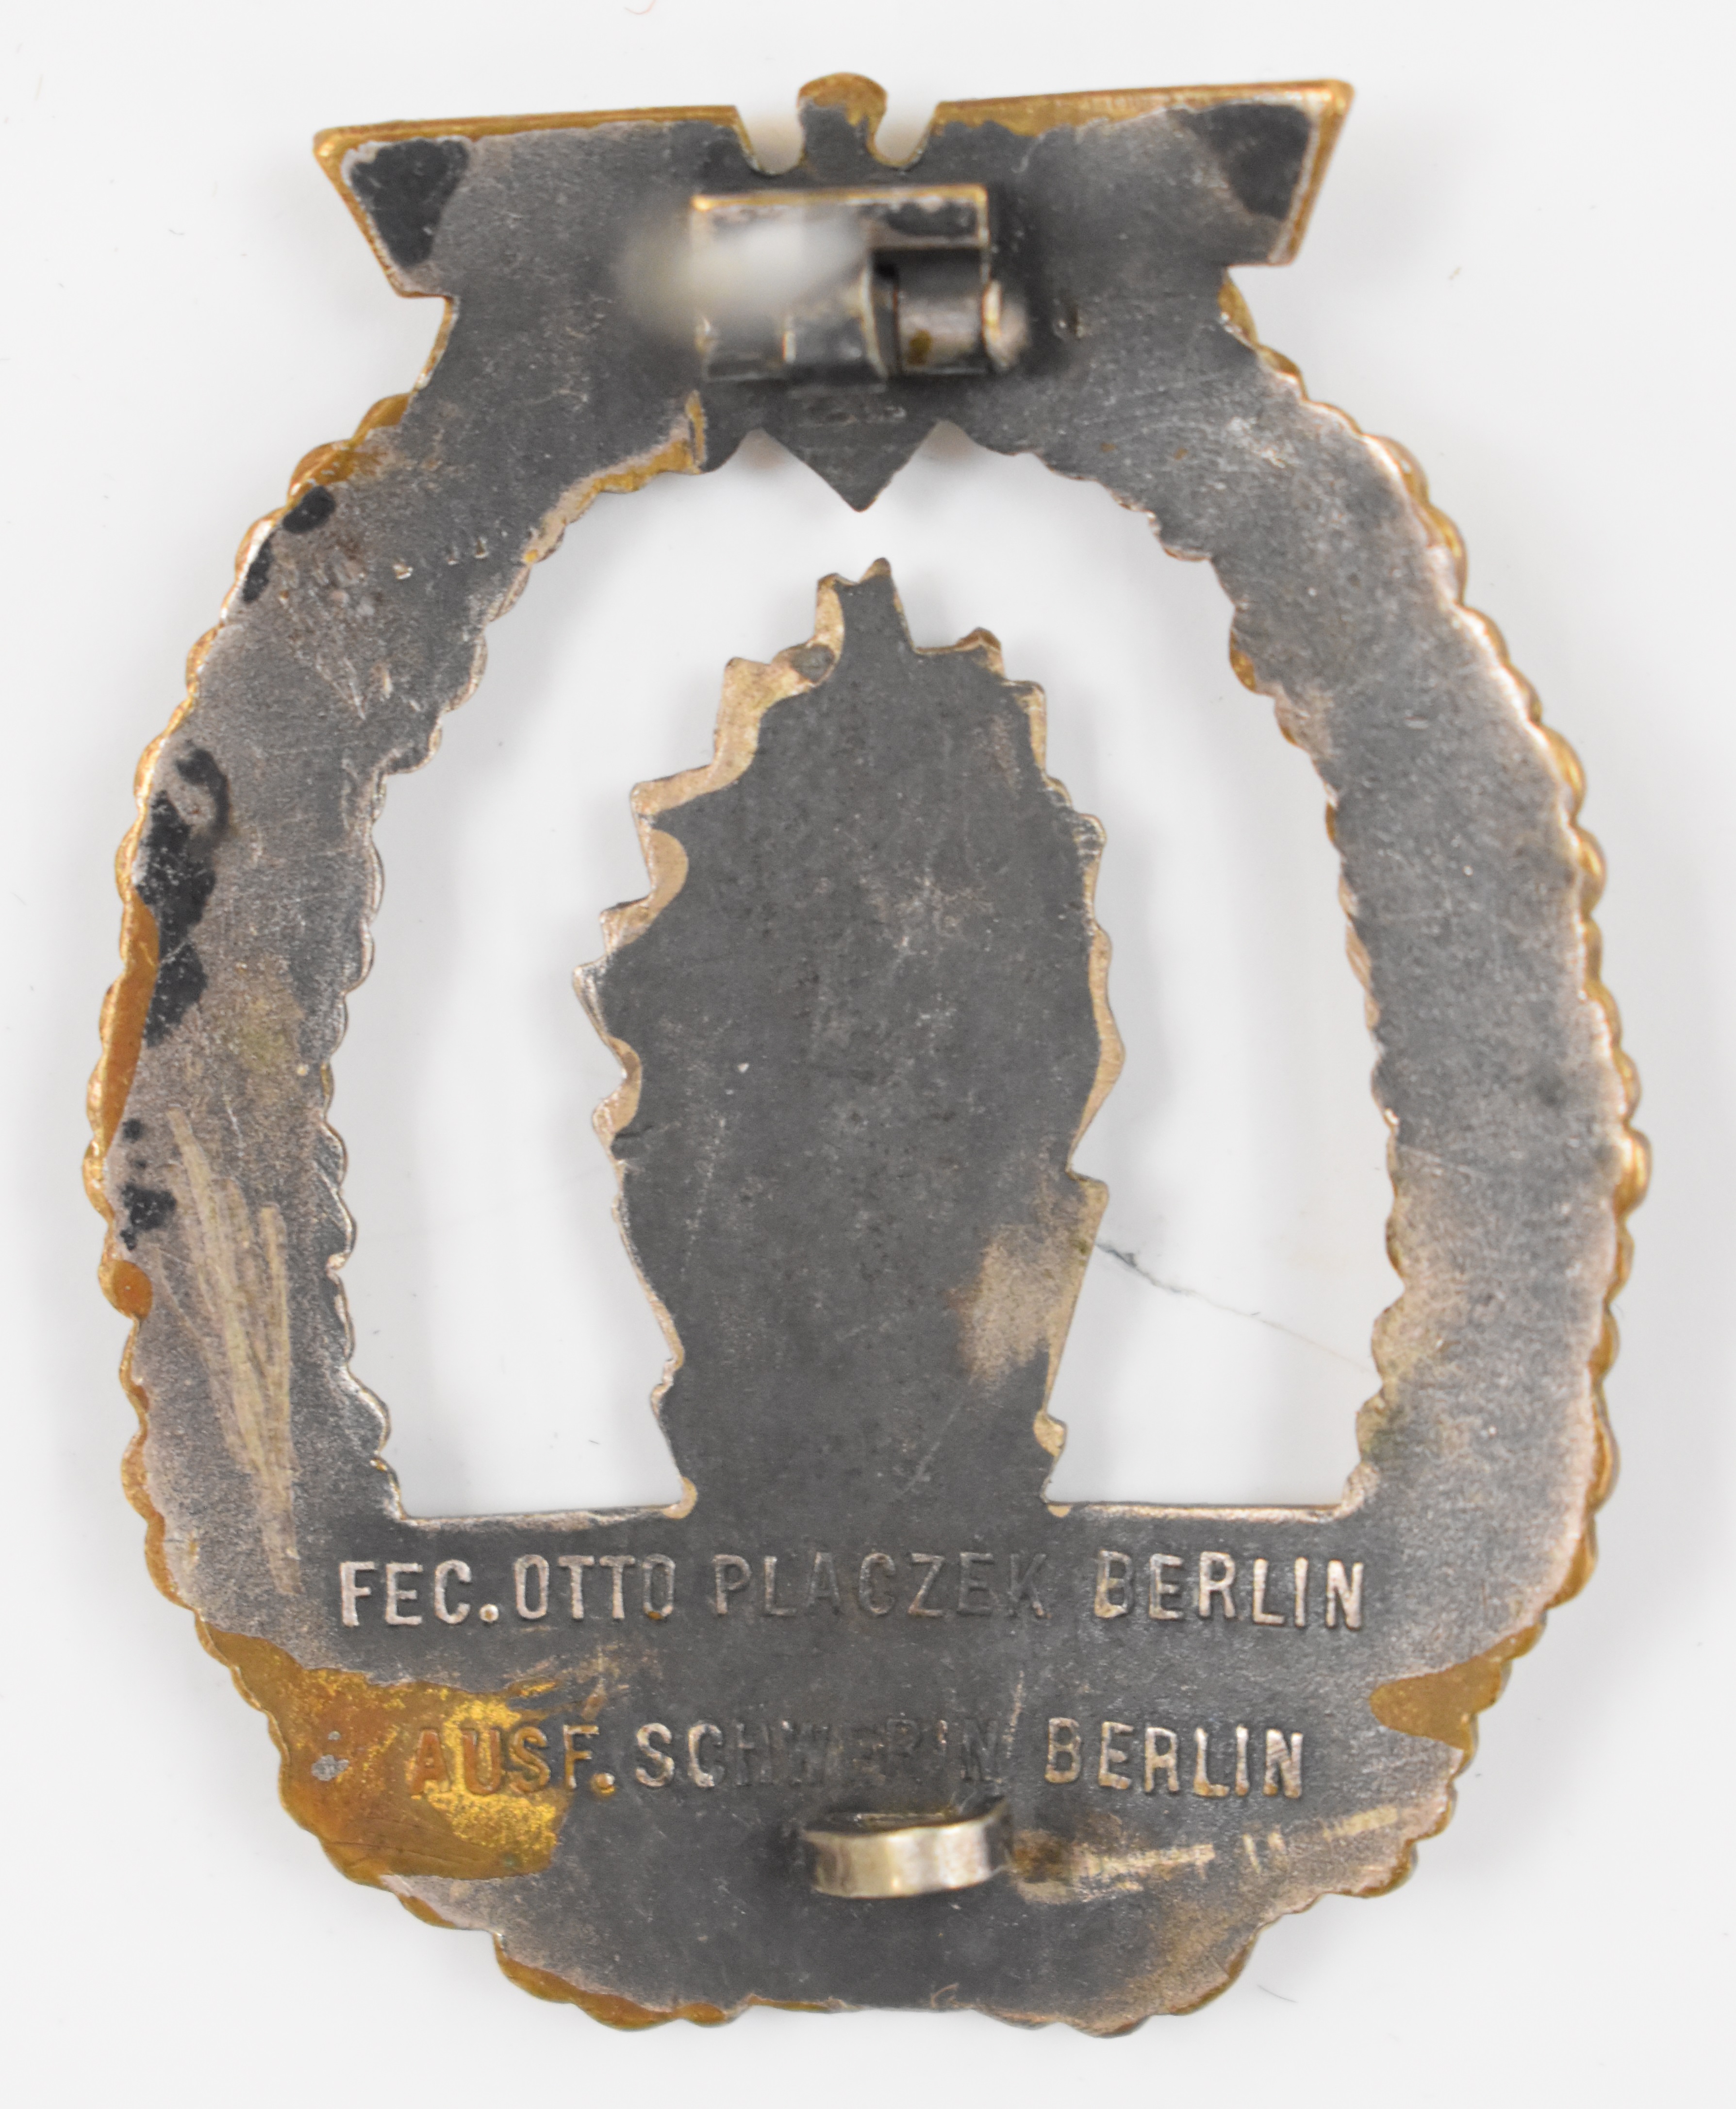 German WW2 Nazi Third Reich Mine Sweepers, Sub Chasers and Escort Vessels War badge, Fec Otto - Image 2 of 4